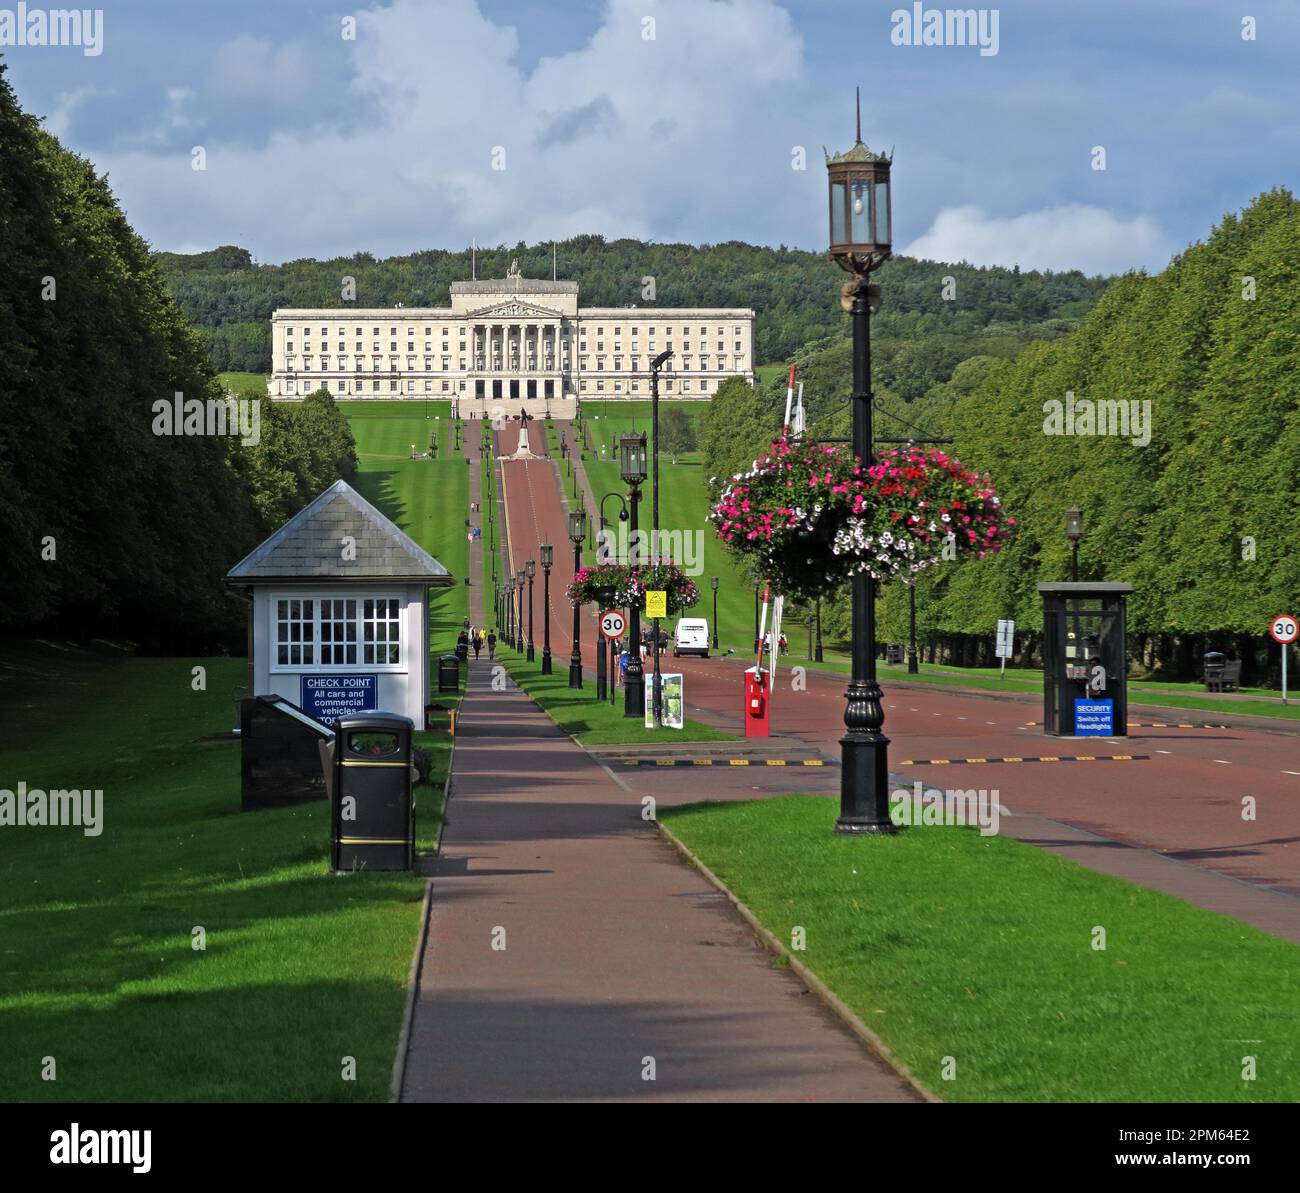 Building & estate of the Northern Ireland Assembly,Stormont Estate, at the end of the tree lined avenue, Belfast,County Down, Northern Ireland,BT4 3LP Stock Photo